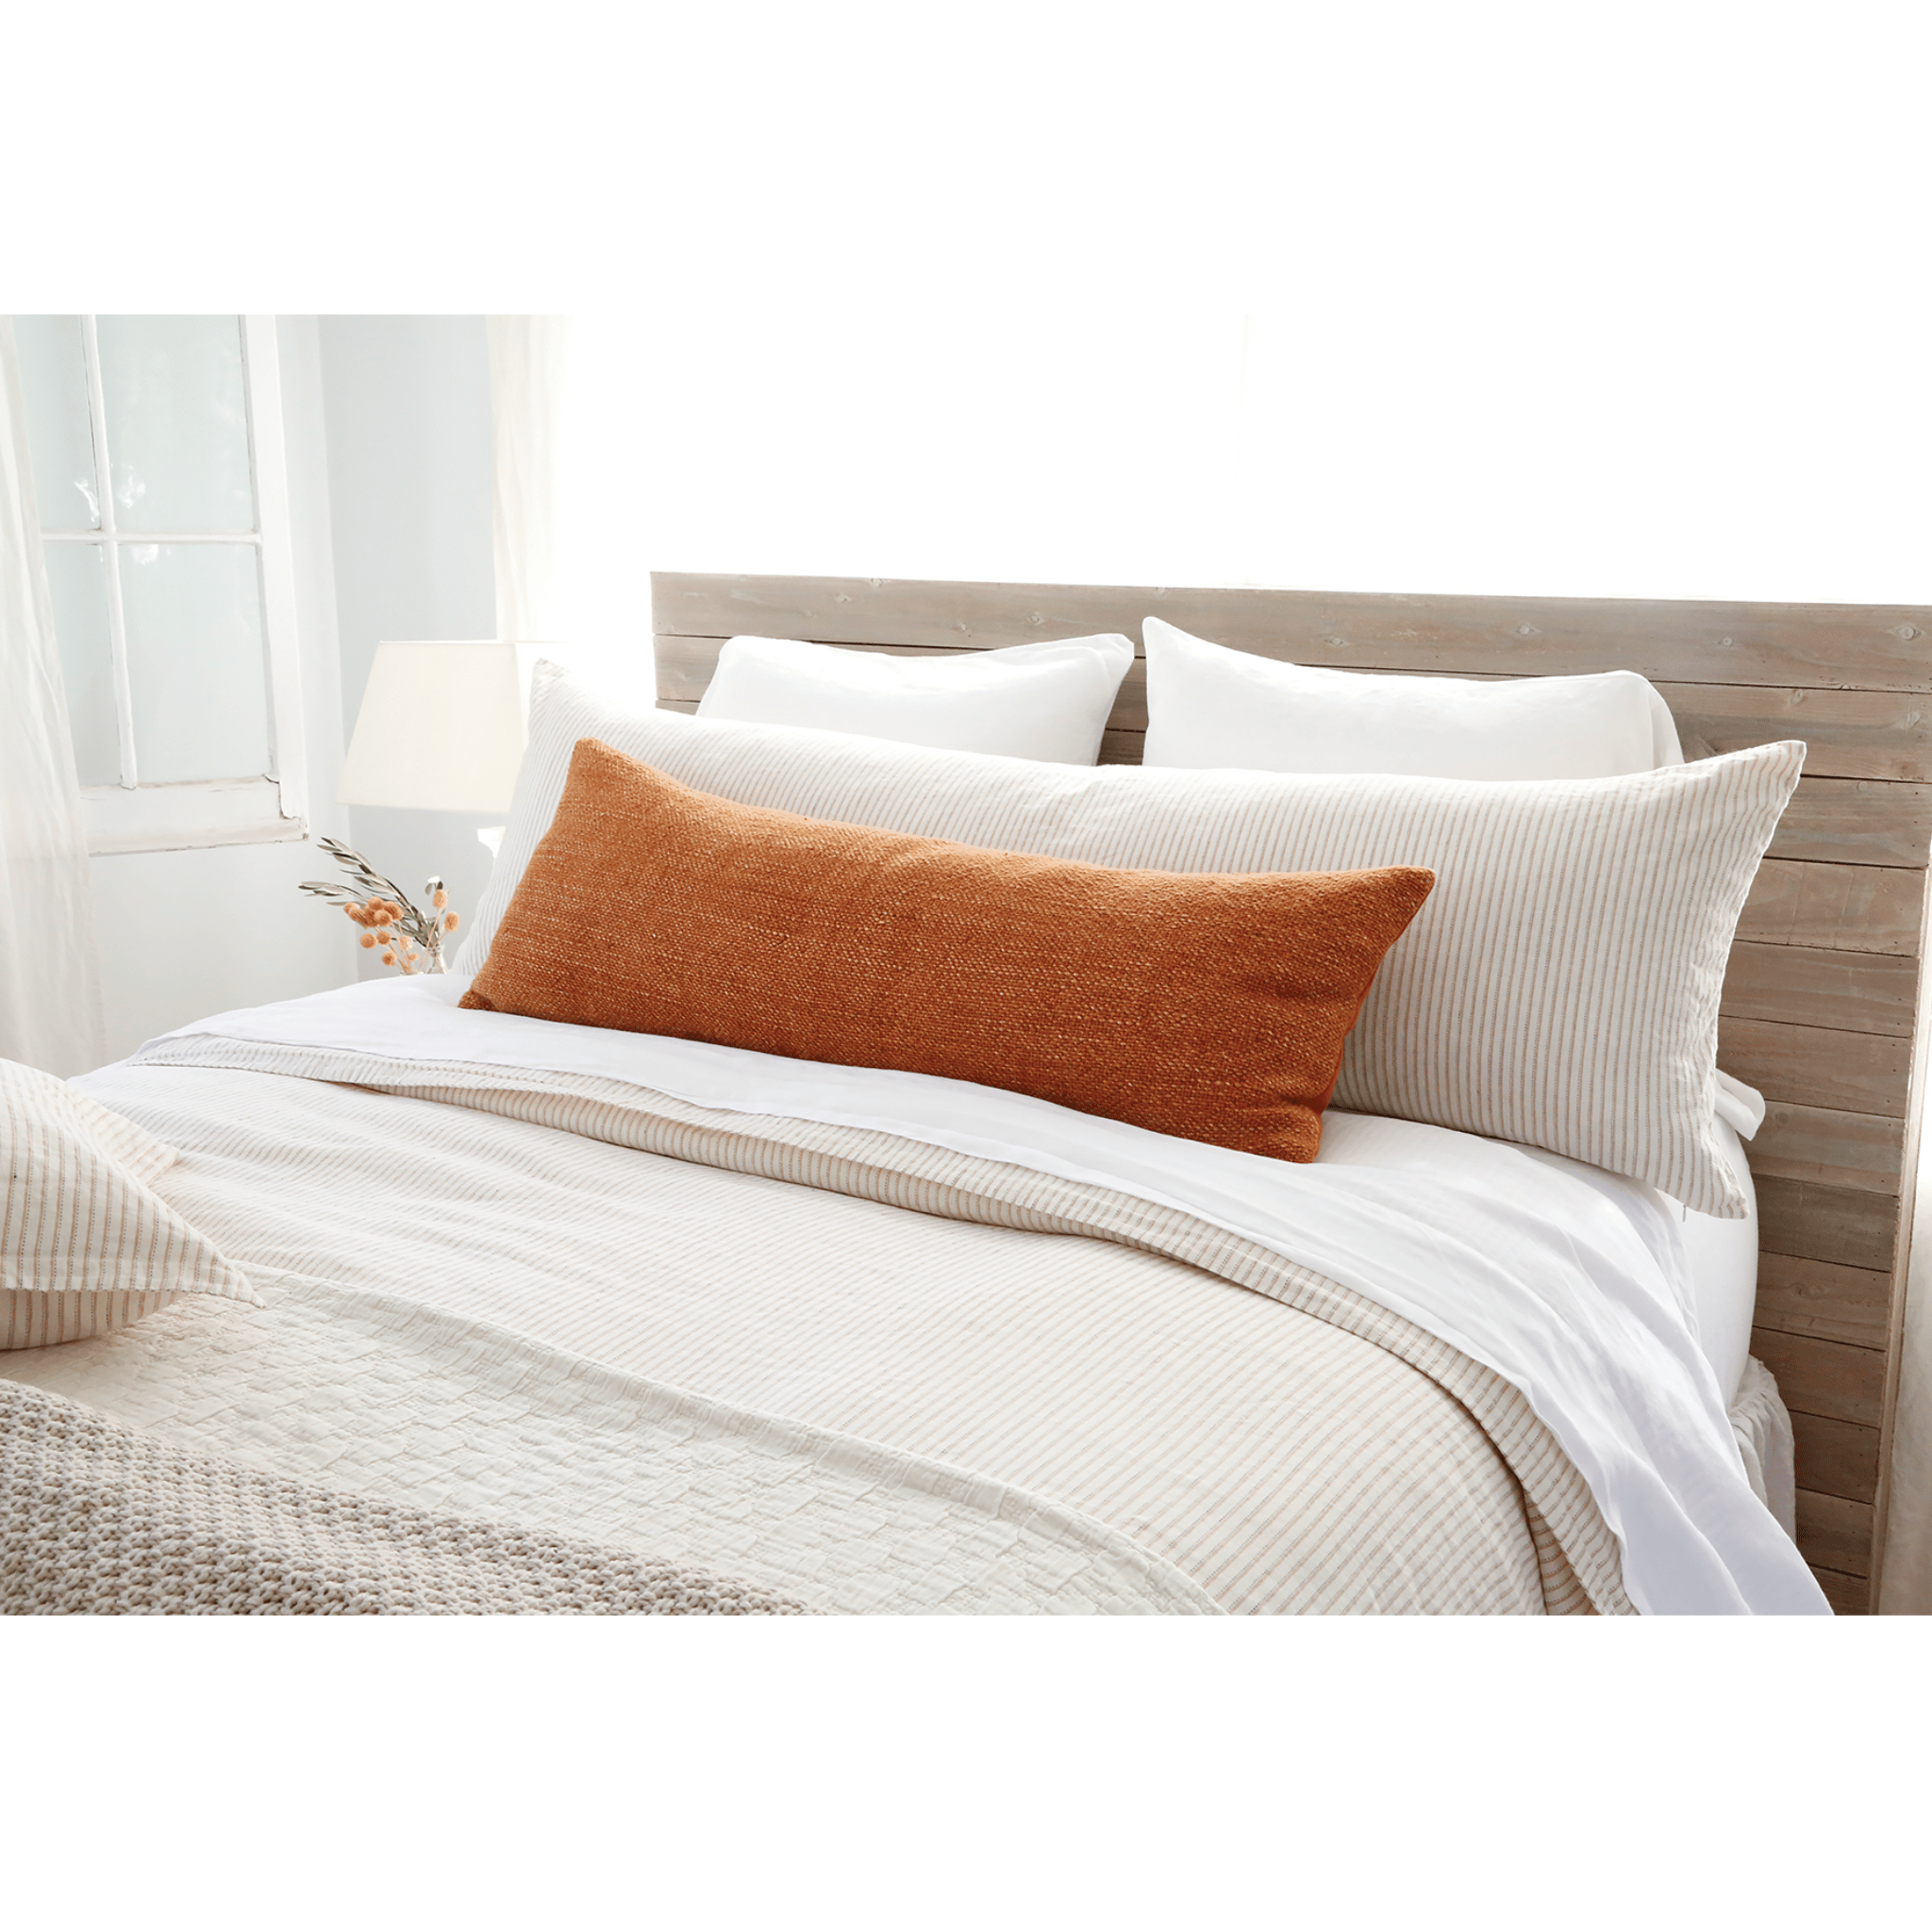 CONNOR BODY PILLOW W/ INSERT - 2 Colors - Pom pom at Home